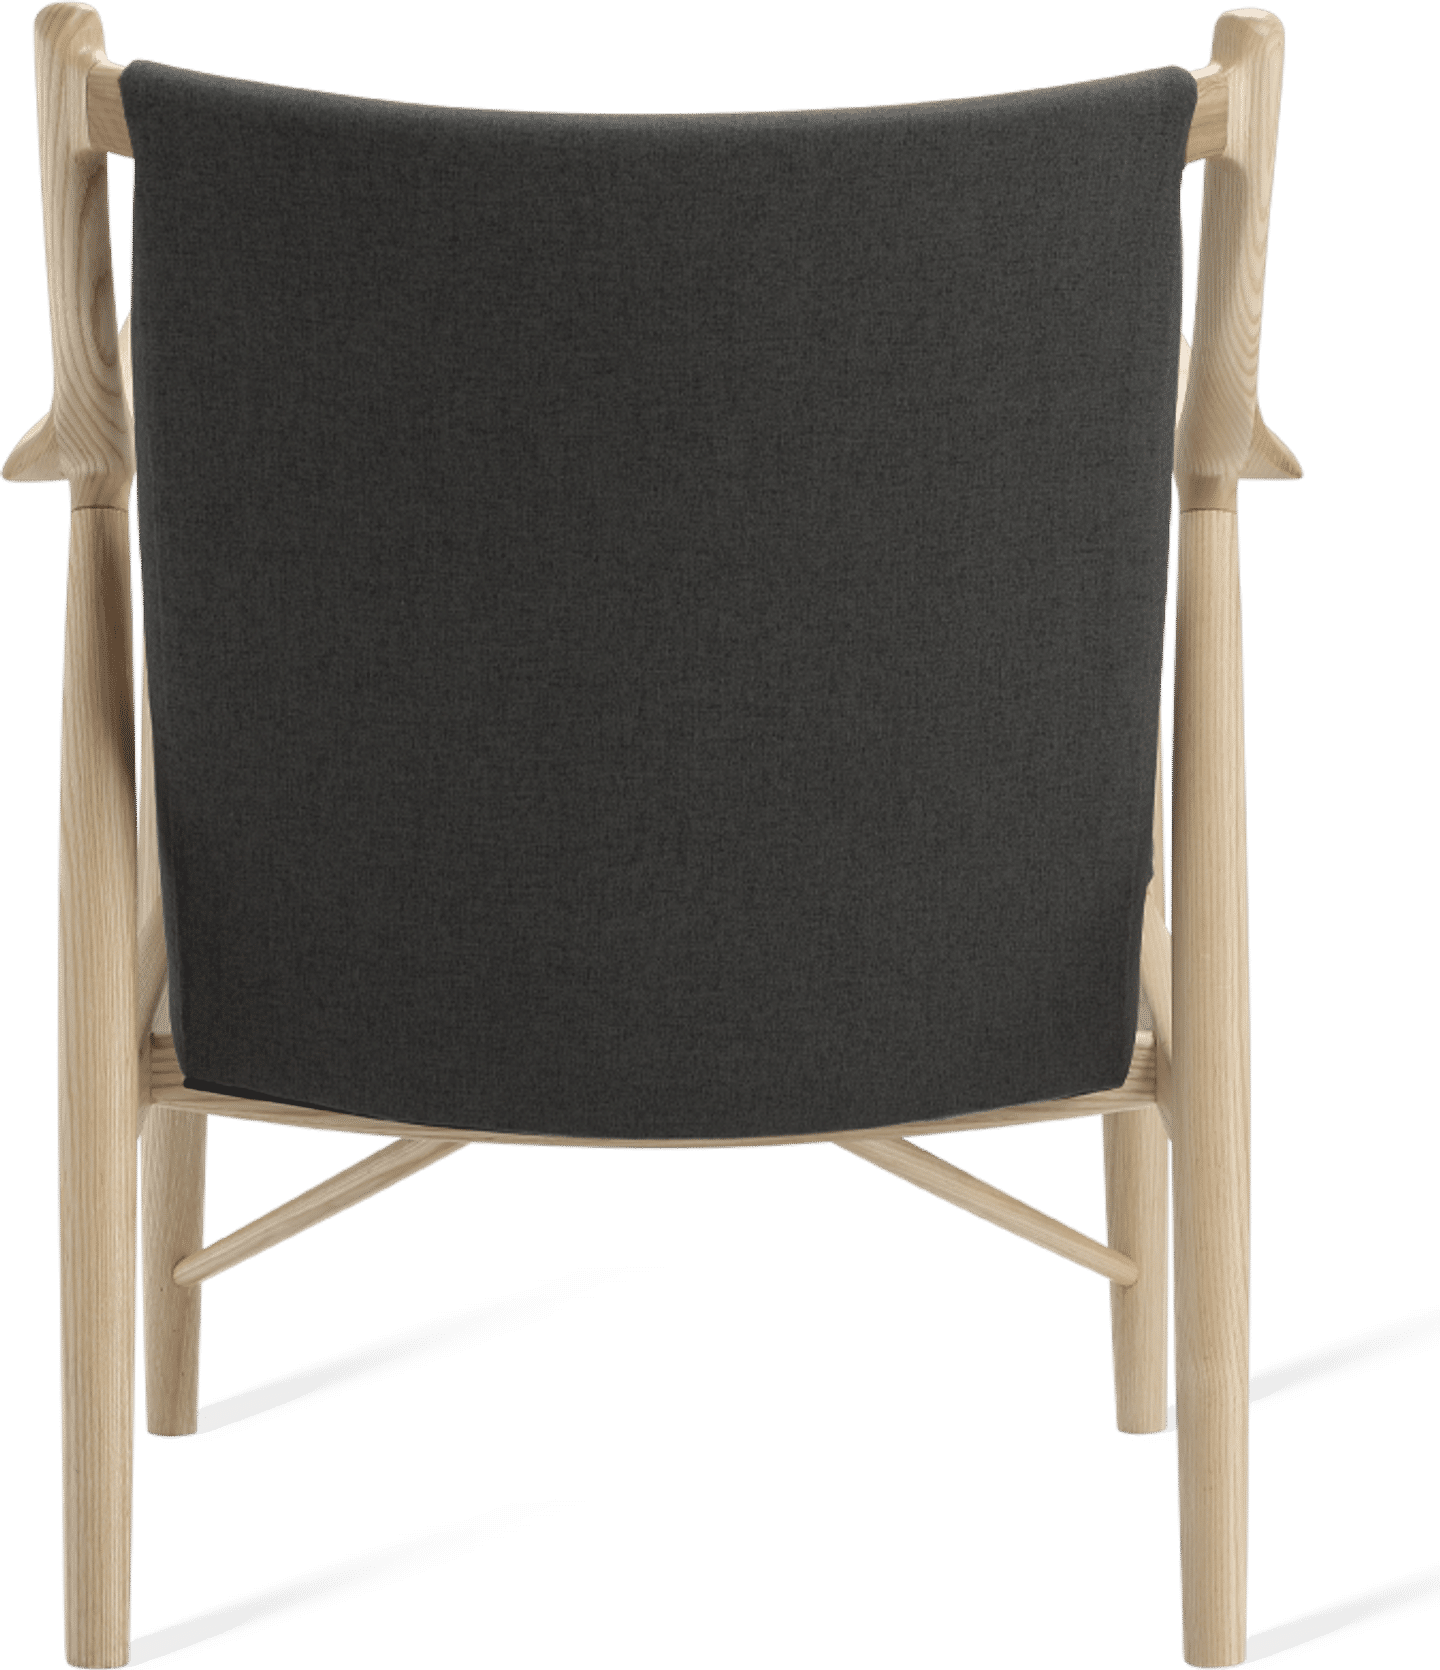 No. 45 Chair Charcoal Grey /Fabric/Solid Ash  image.